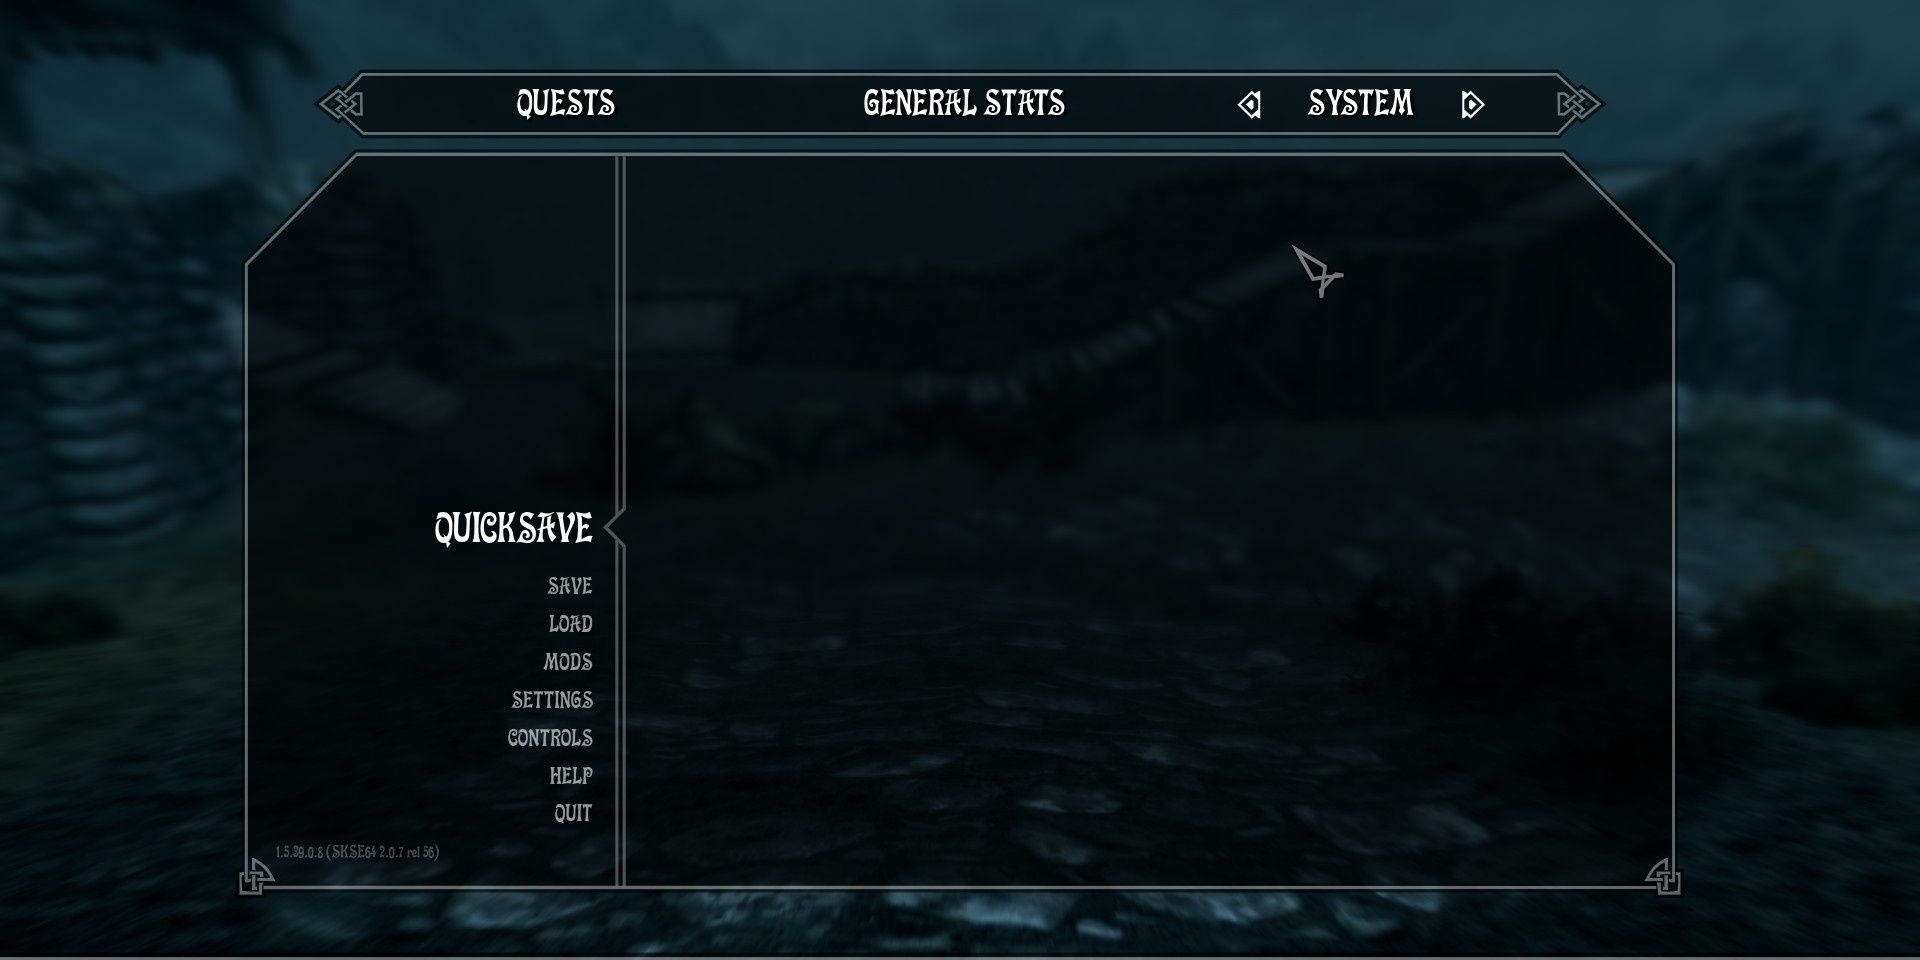 Skyrim Stay At The System Page mod